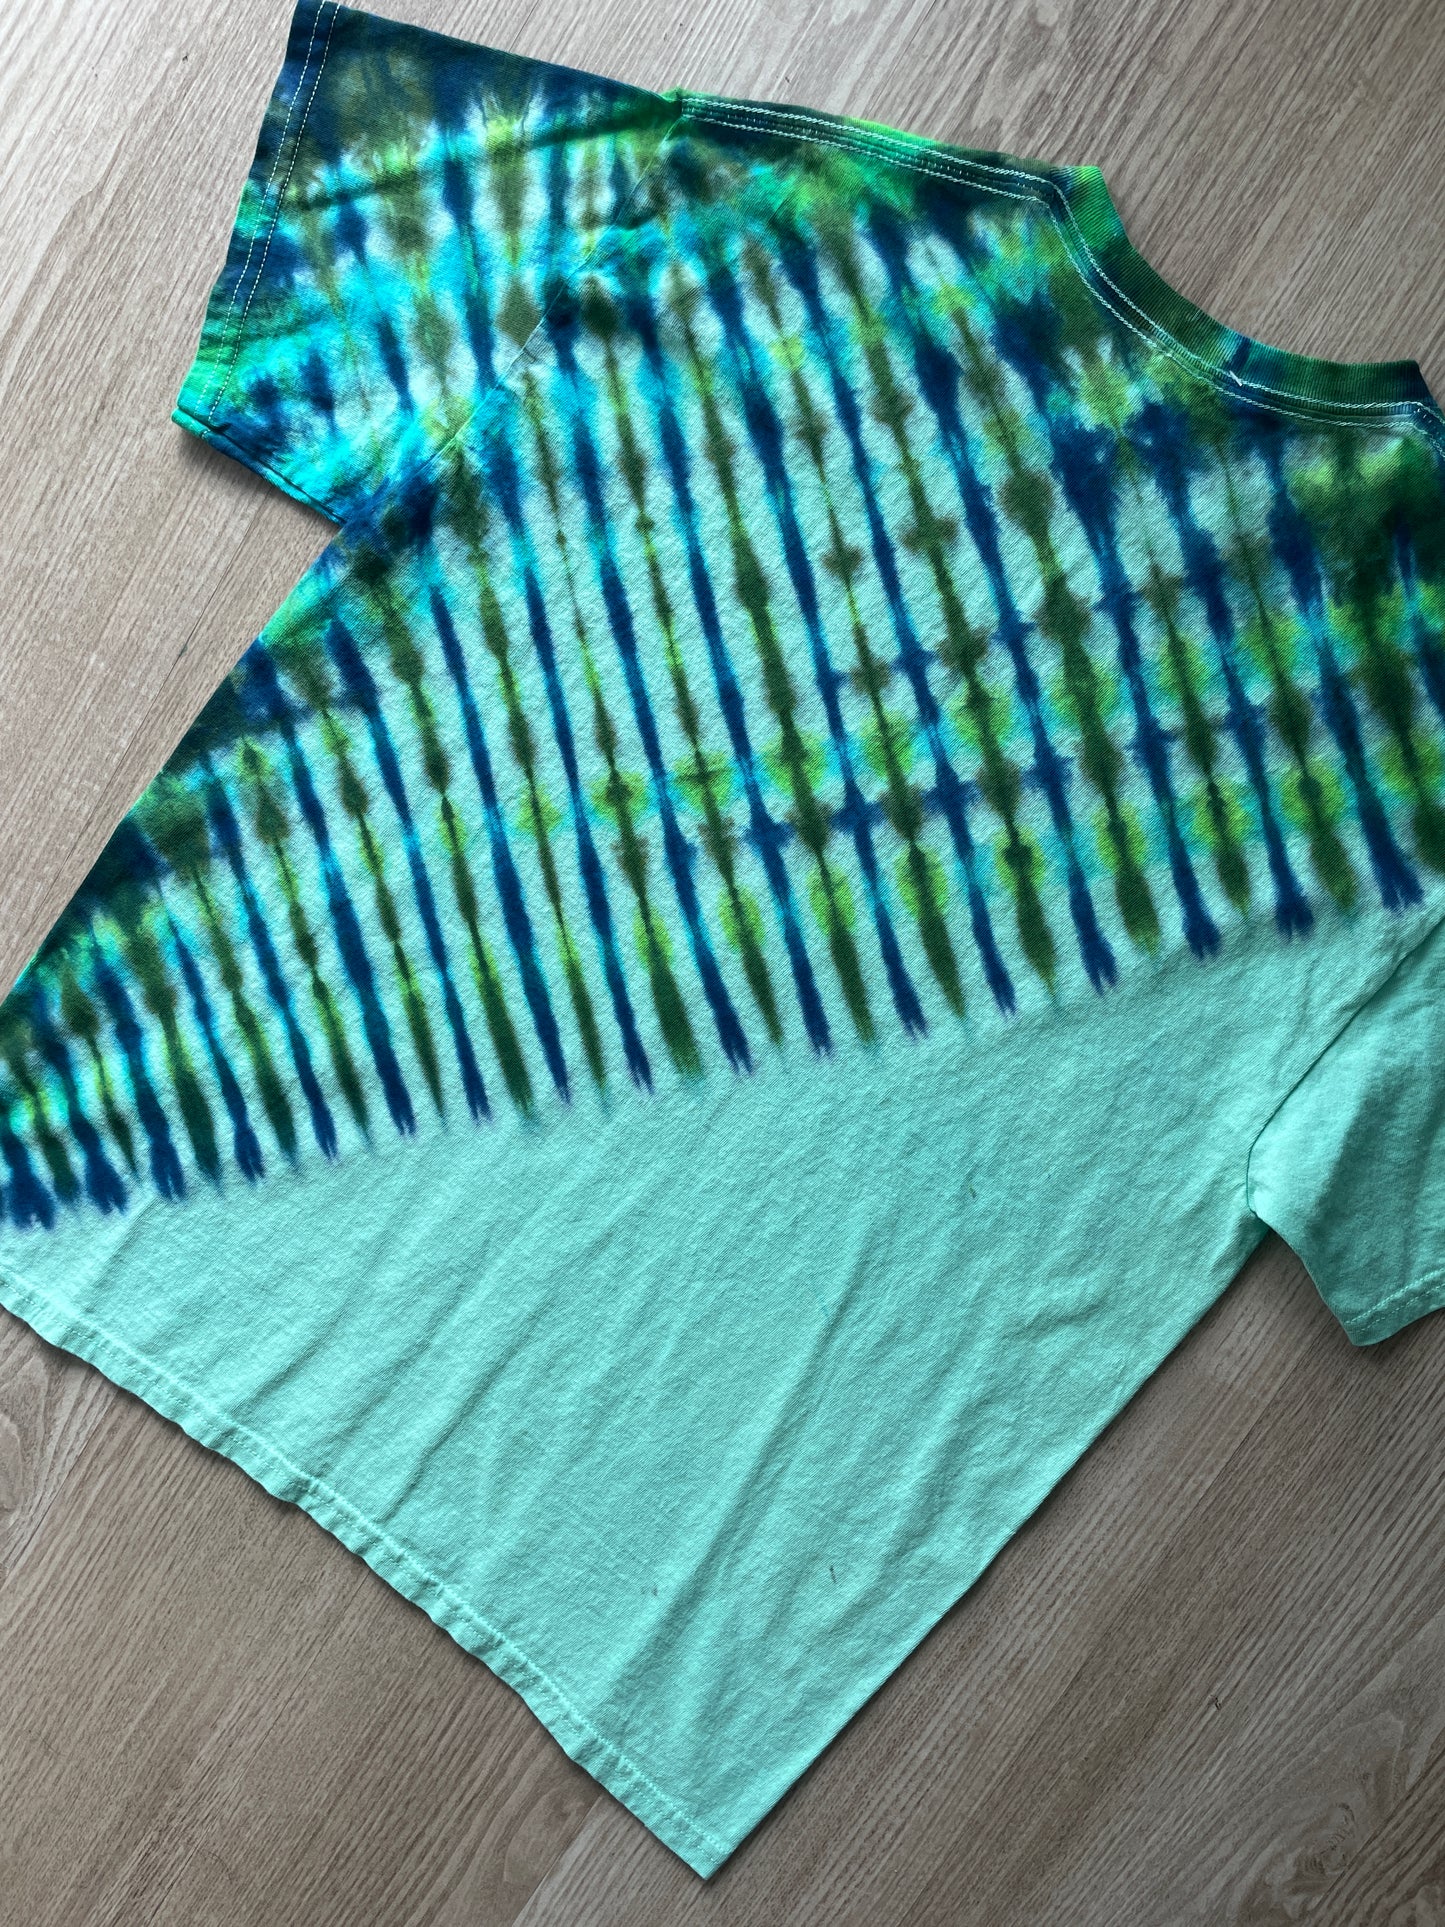 LARGE Men’s Climbing Shoe Handmade Tie Dyed T-Shirt | One-Of-a-Kind Green and Blue Pleated Short Sleeve